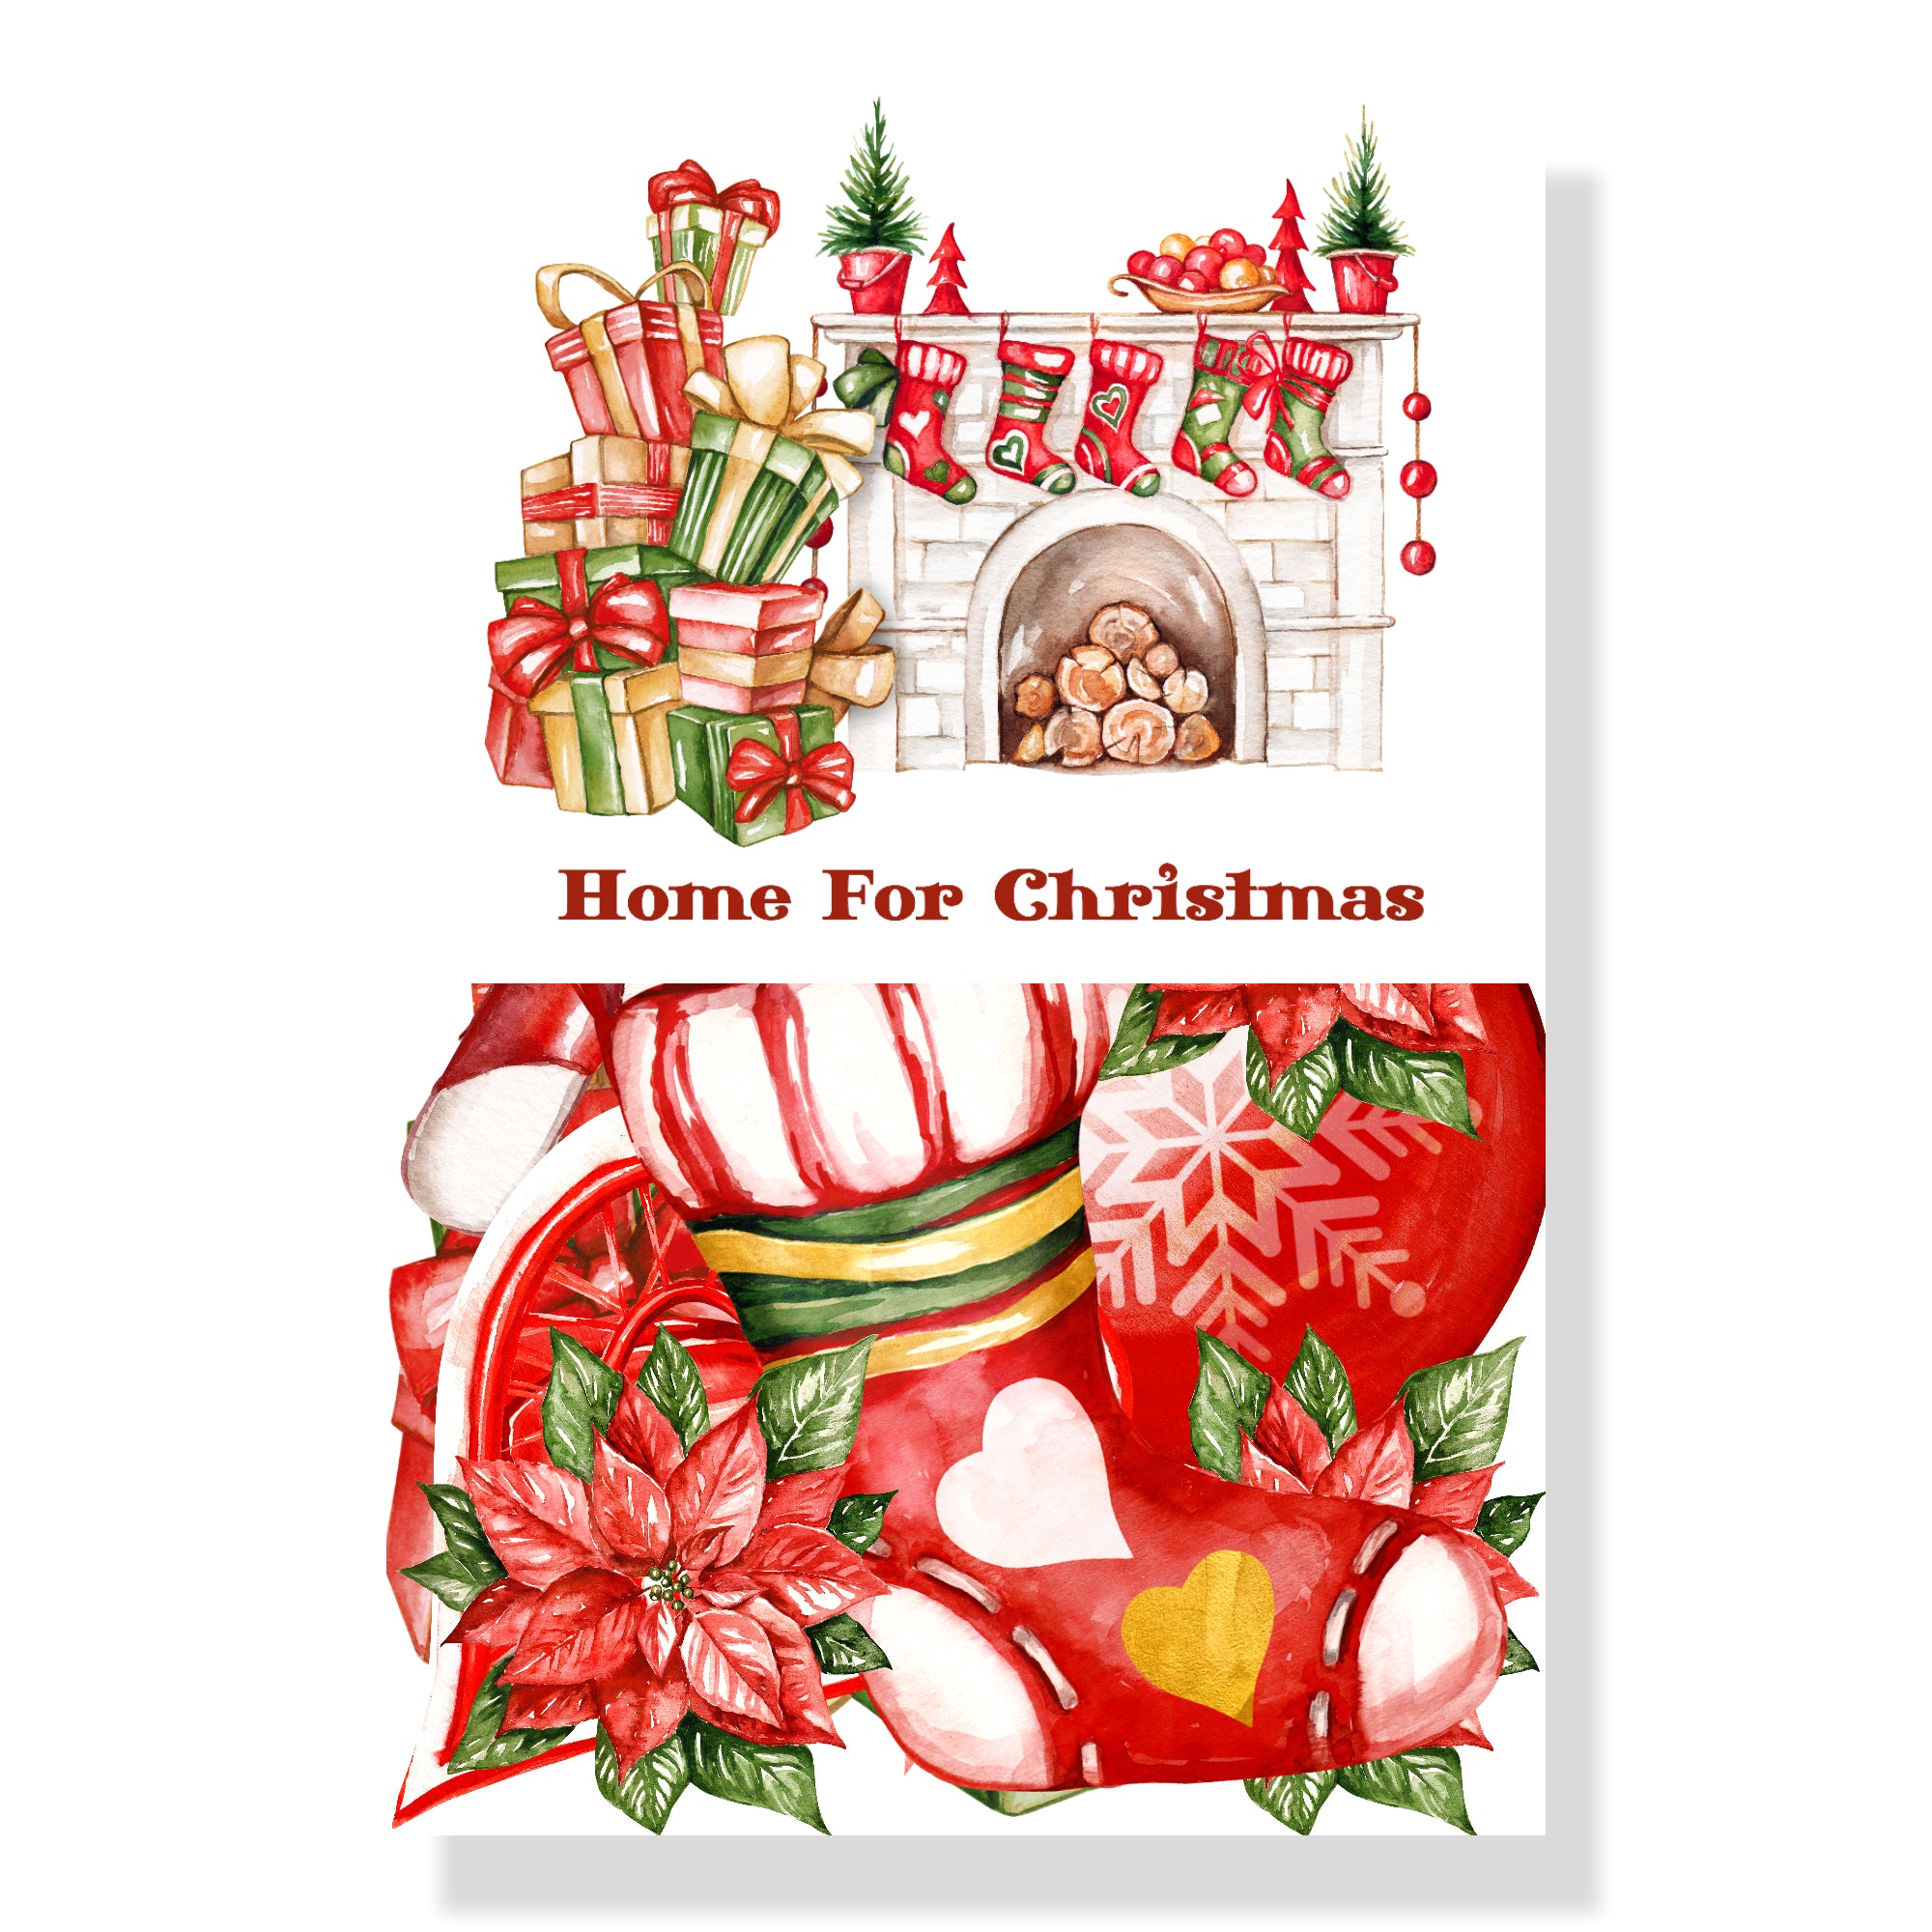 Home For Christmas 12 x 12 Scrapbook Collection Kit by SSC Designs